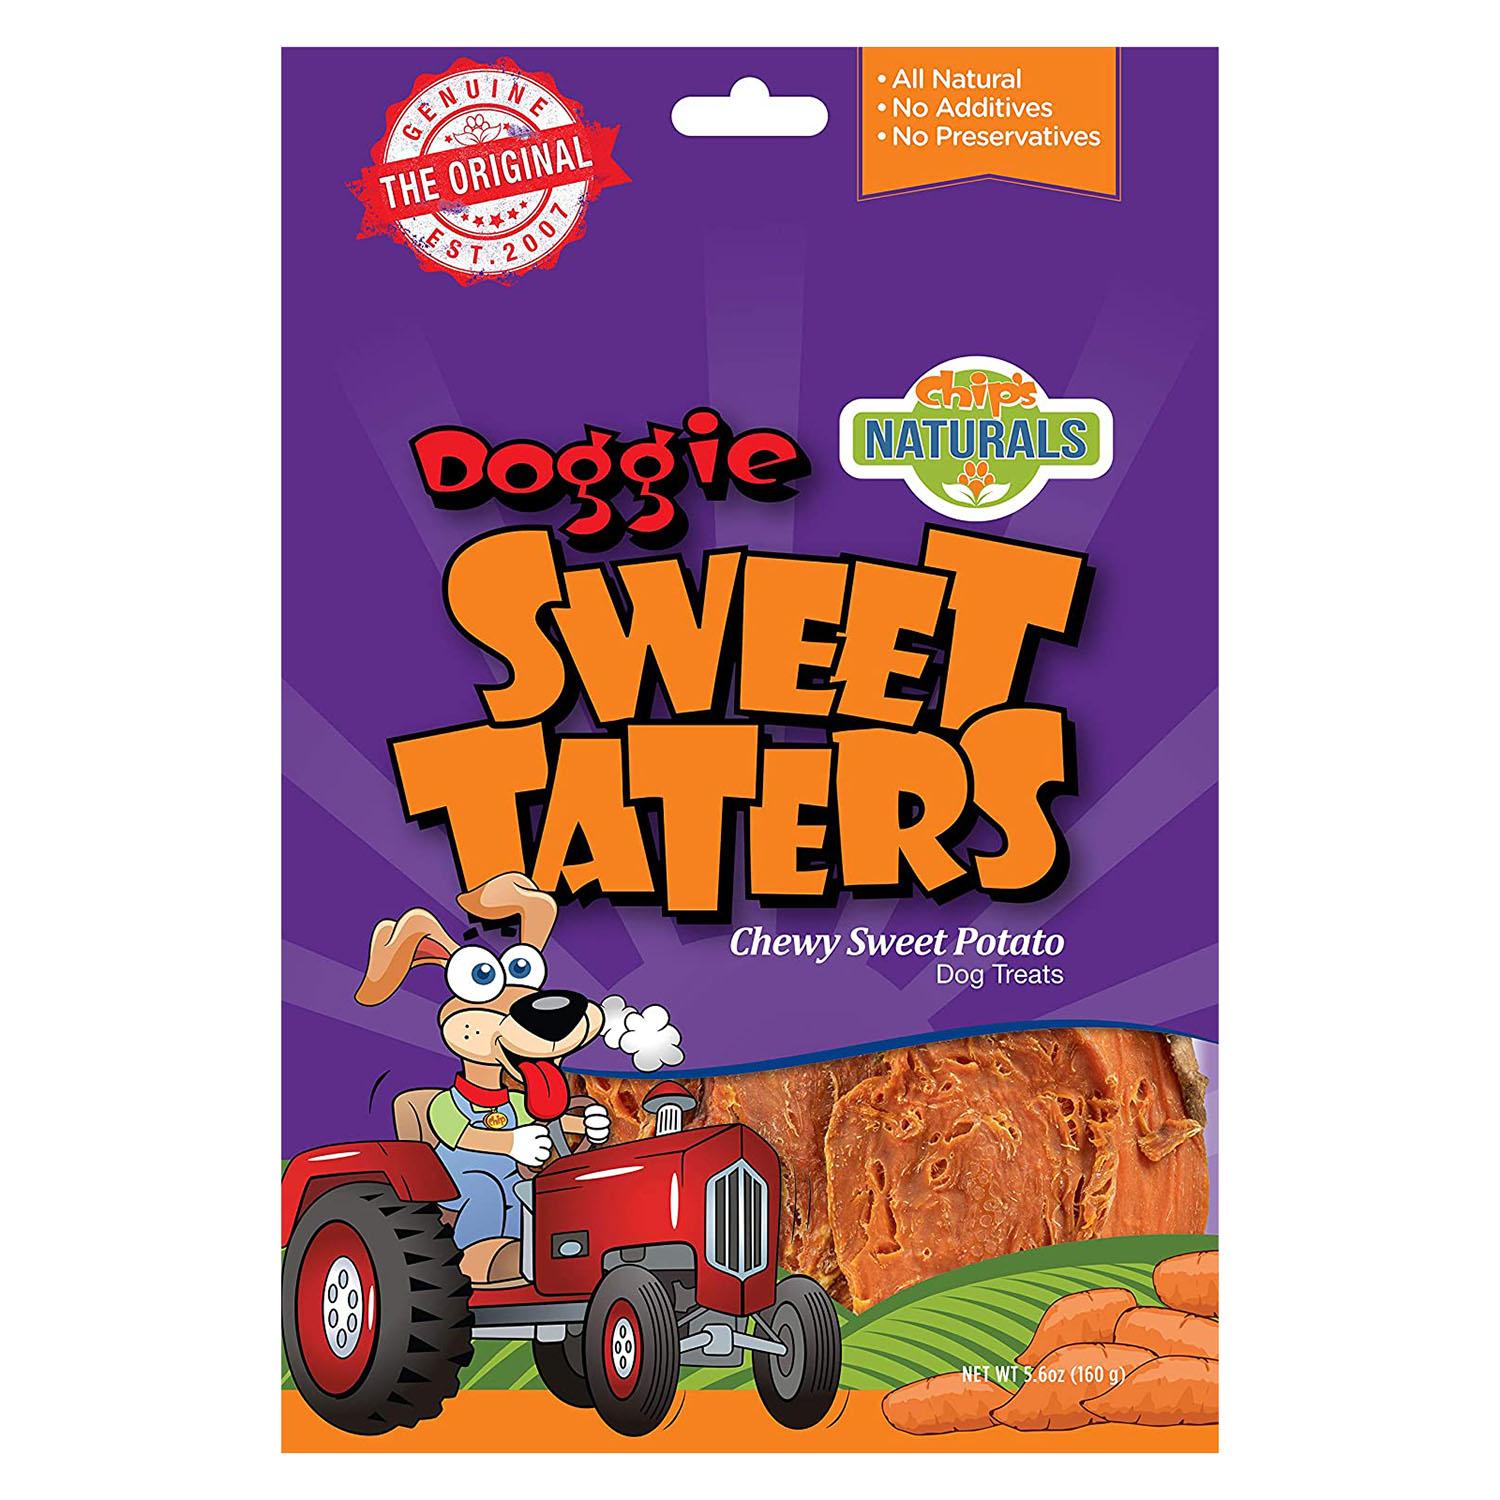 Chip's Naturals Doggie Sweet Taters Dog Treats